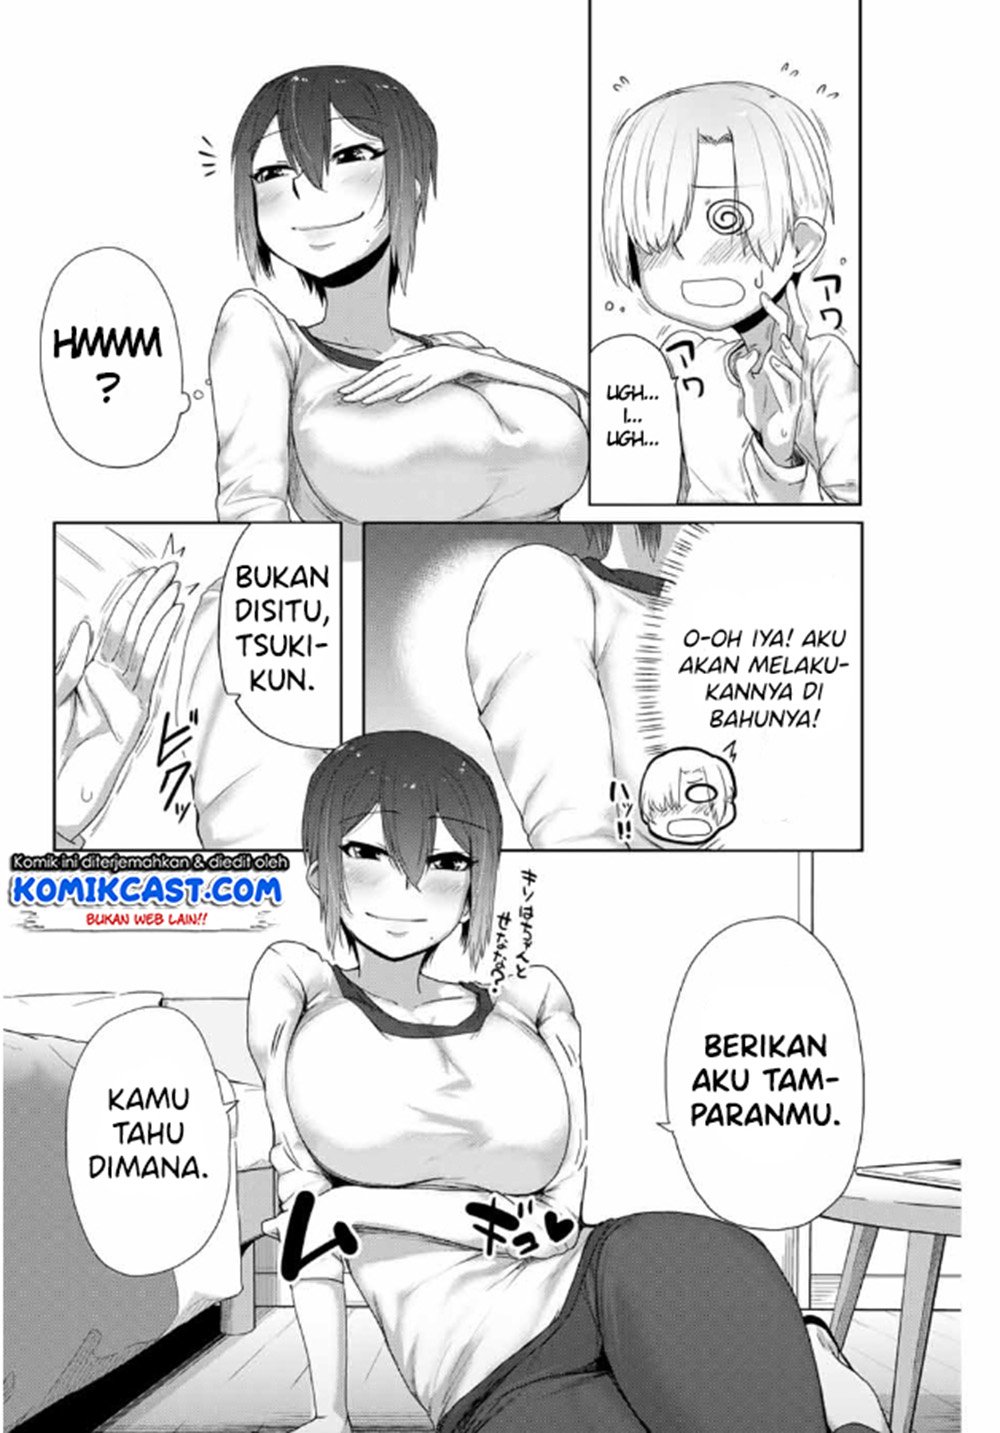 The Girl with a Kansai Accent and the Pure Boy Chapter 06